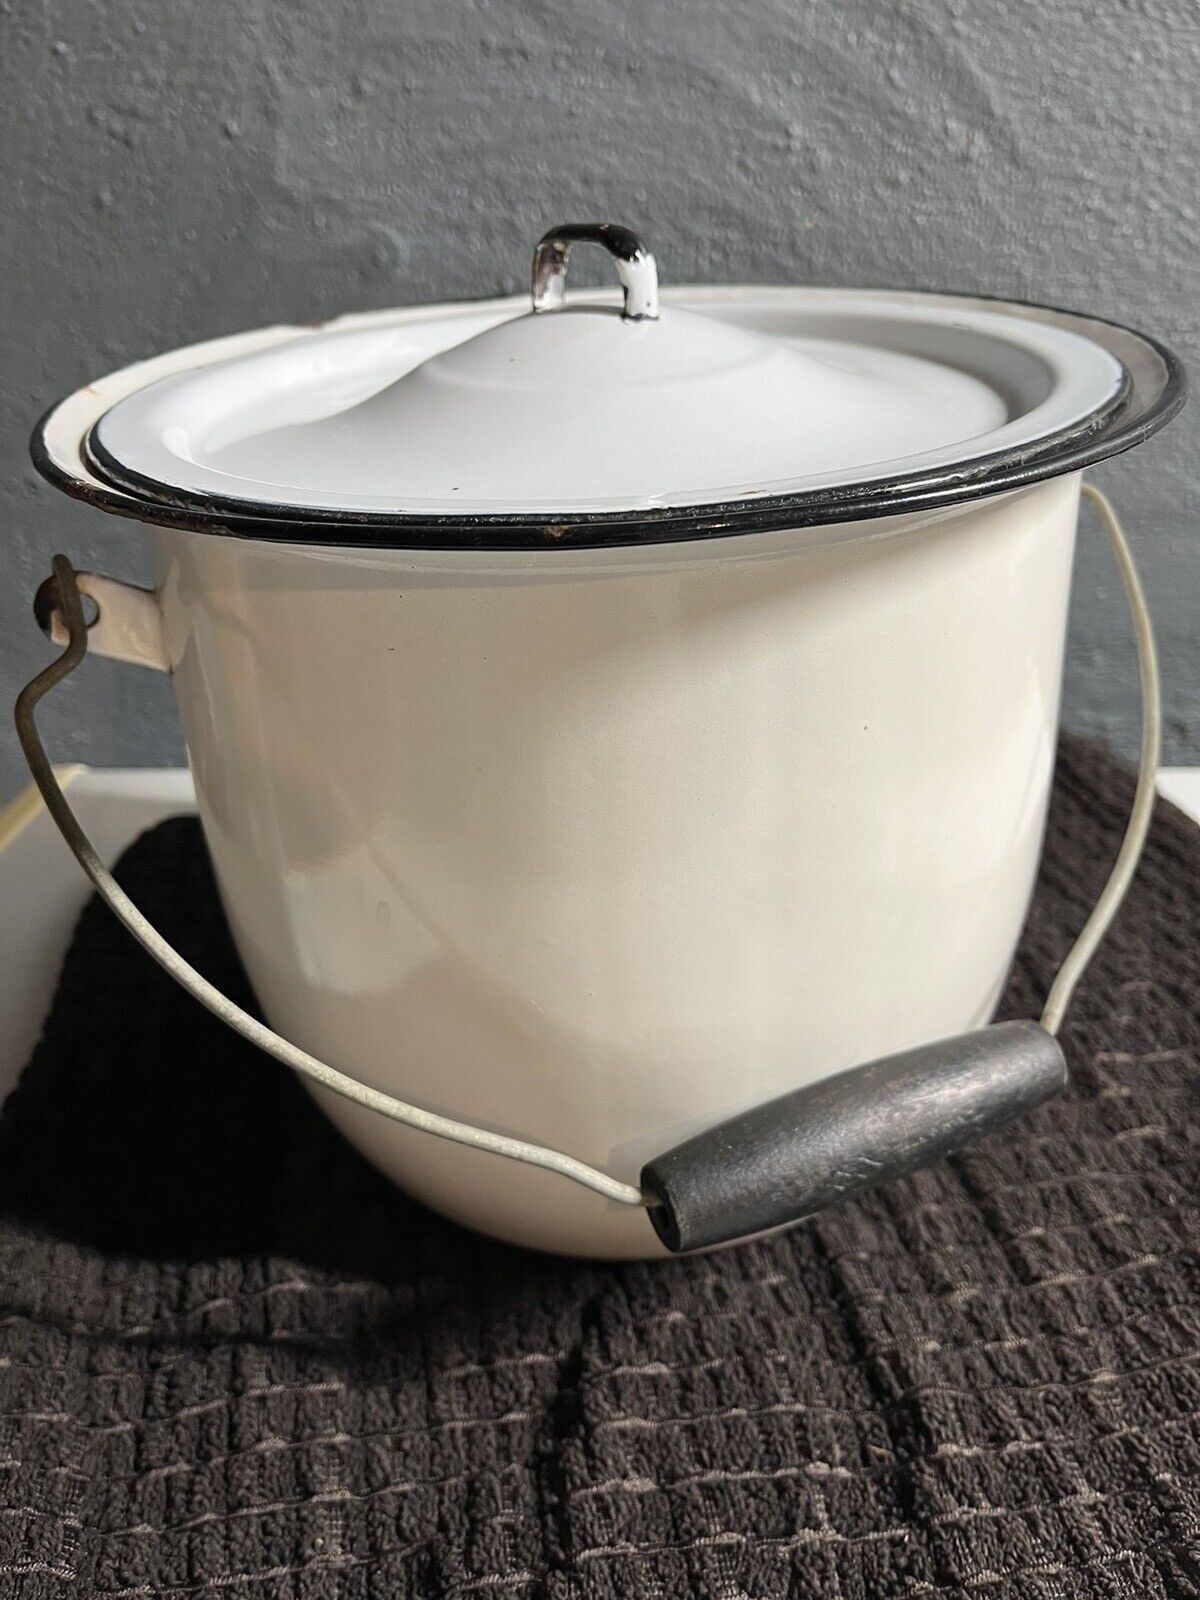 Original Vintage Large Black And White Enamel Stock Pot With Lid And Handle 9”W